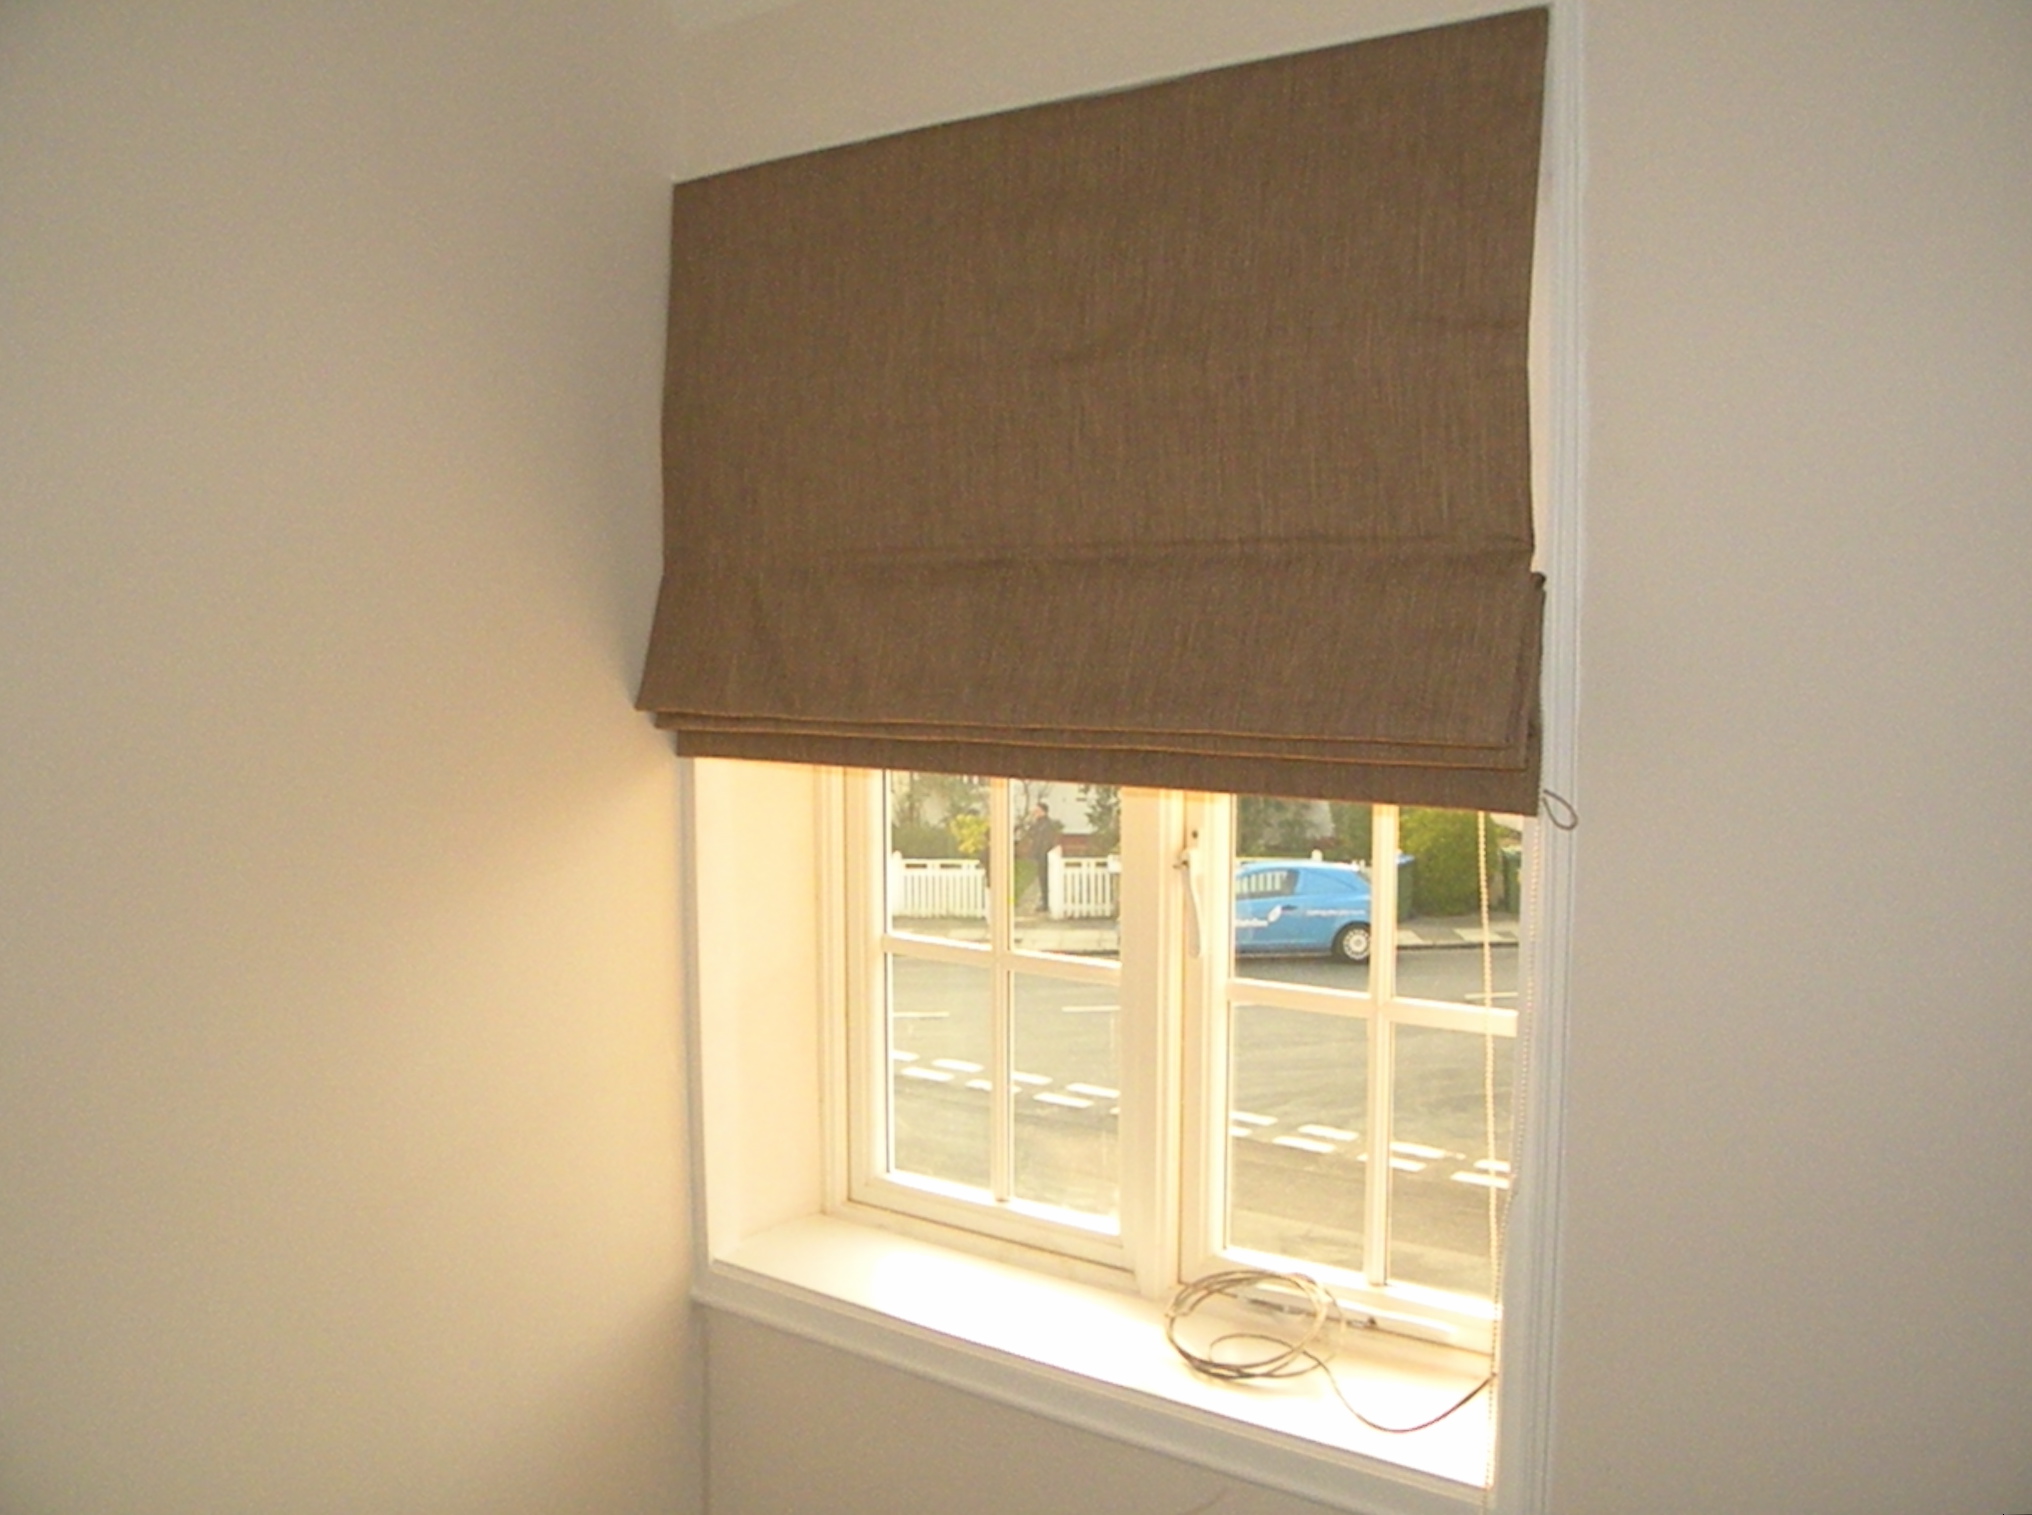 Thermal blinds in retrofit projects | The Thermal Blind Co.